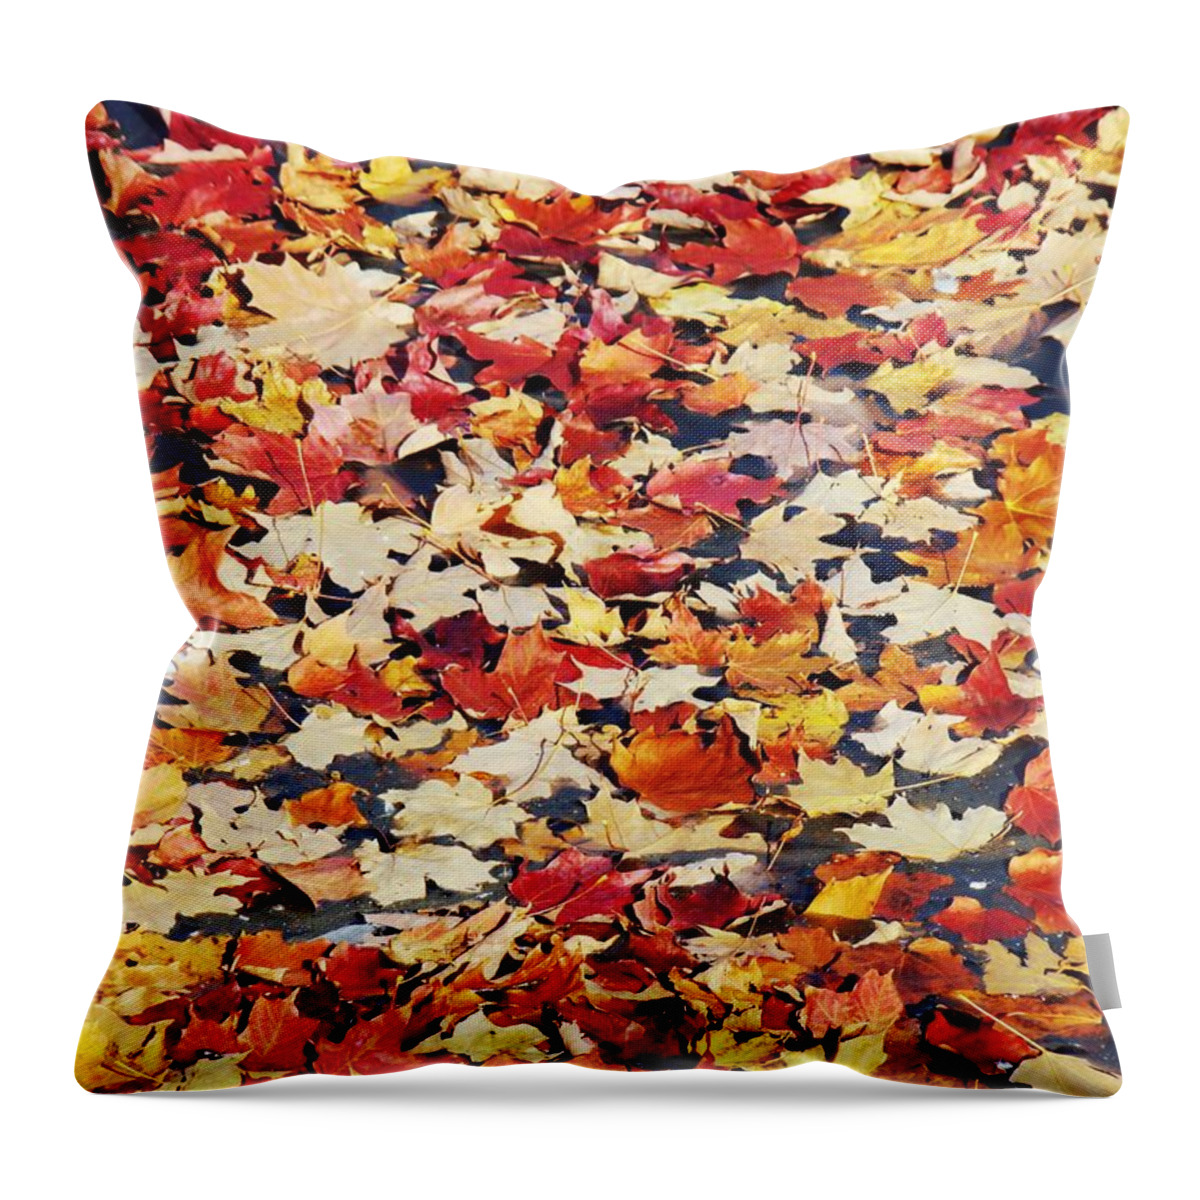 Leaves Throw Pillow featuring the photograph Fallen Leaves by Zinvolle Art